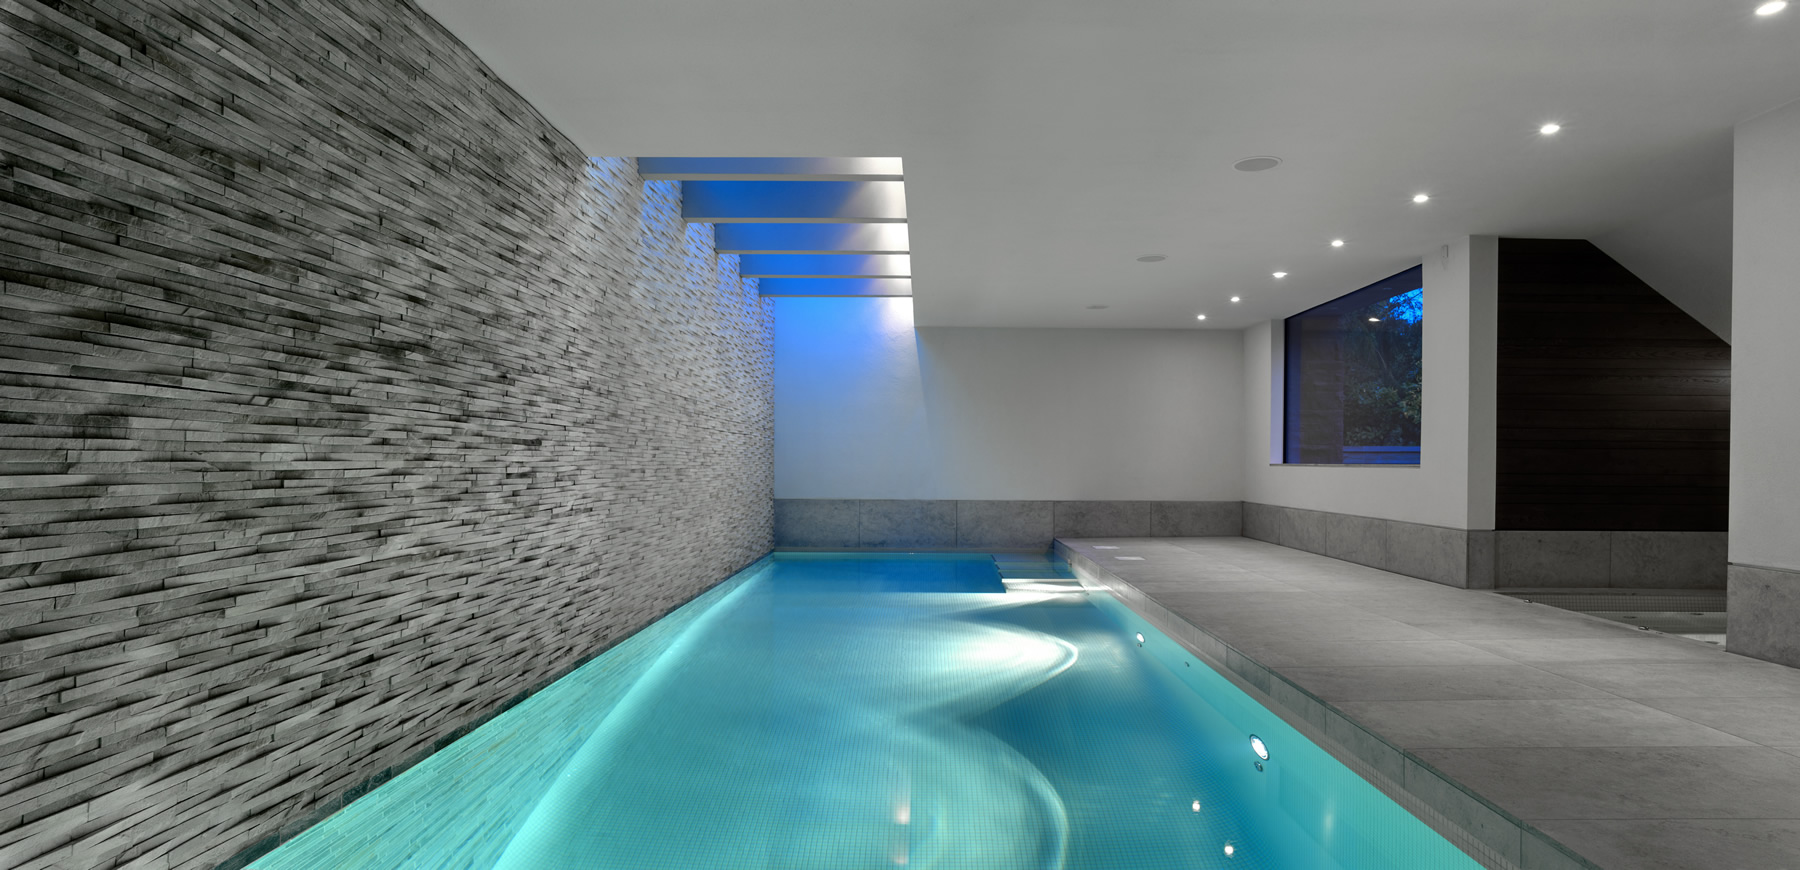 Nice Swimming Pool Ideas With Luxury Pool Mosaic Wall Tile Modern Floortile Ceiling Lighting For Rectangle Indoor Swimming Pool Design  Pool Design